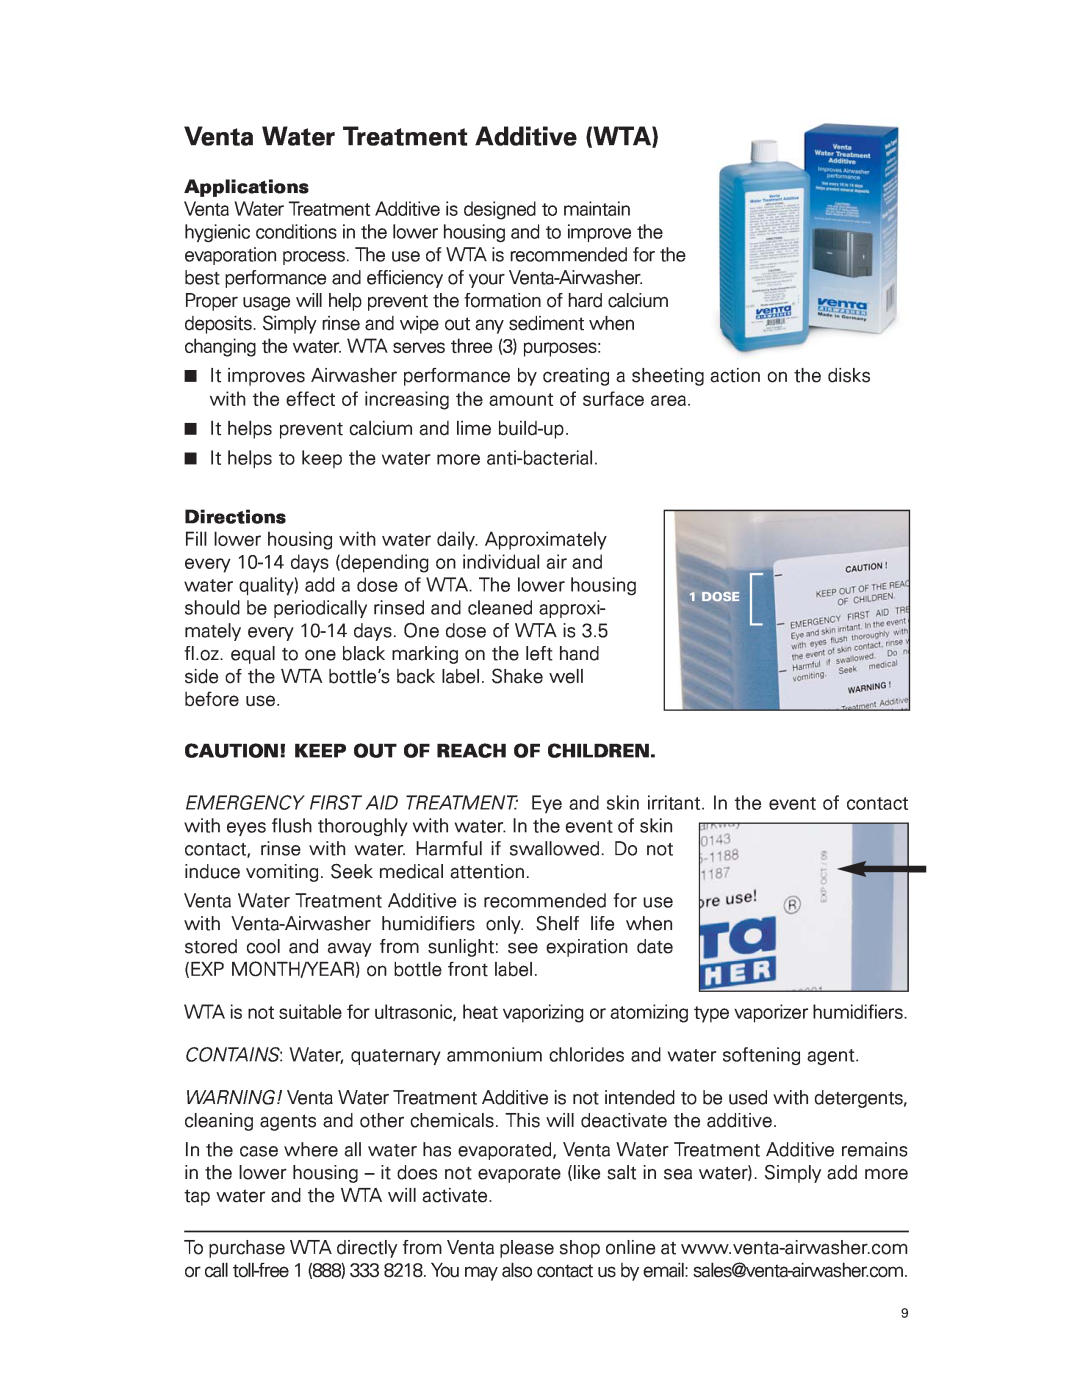 Venta Airwasher LW 24 Venta Water Treatment Additive WTA, Applications, Directions, Caution! Keep Out Of Reach Of Children 